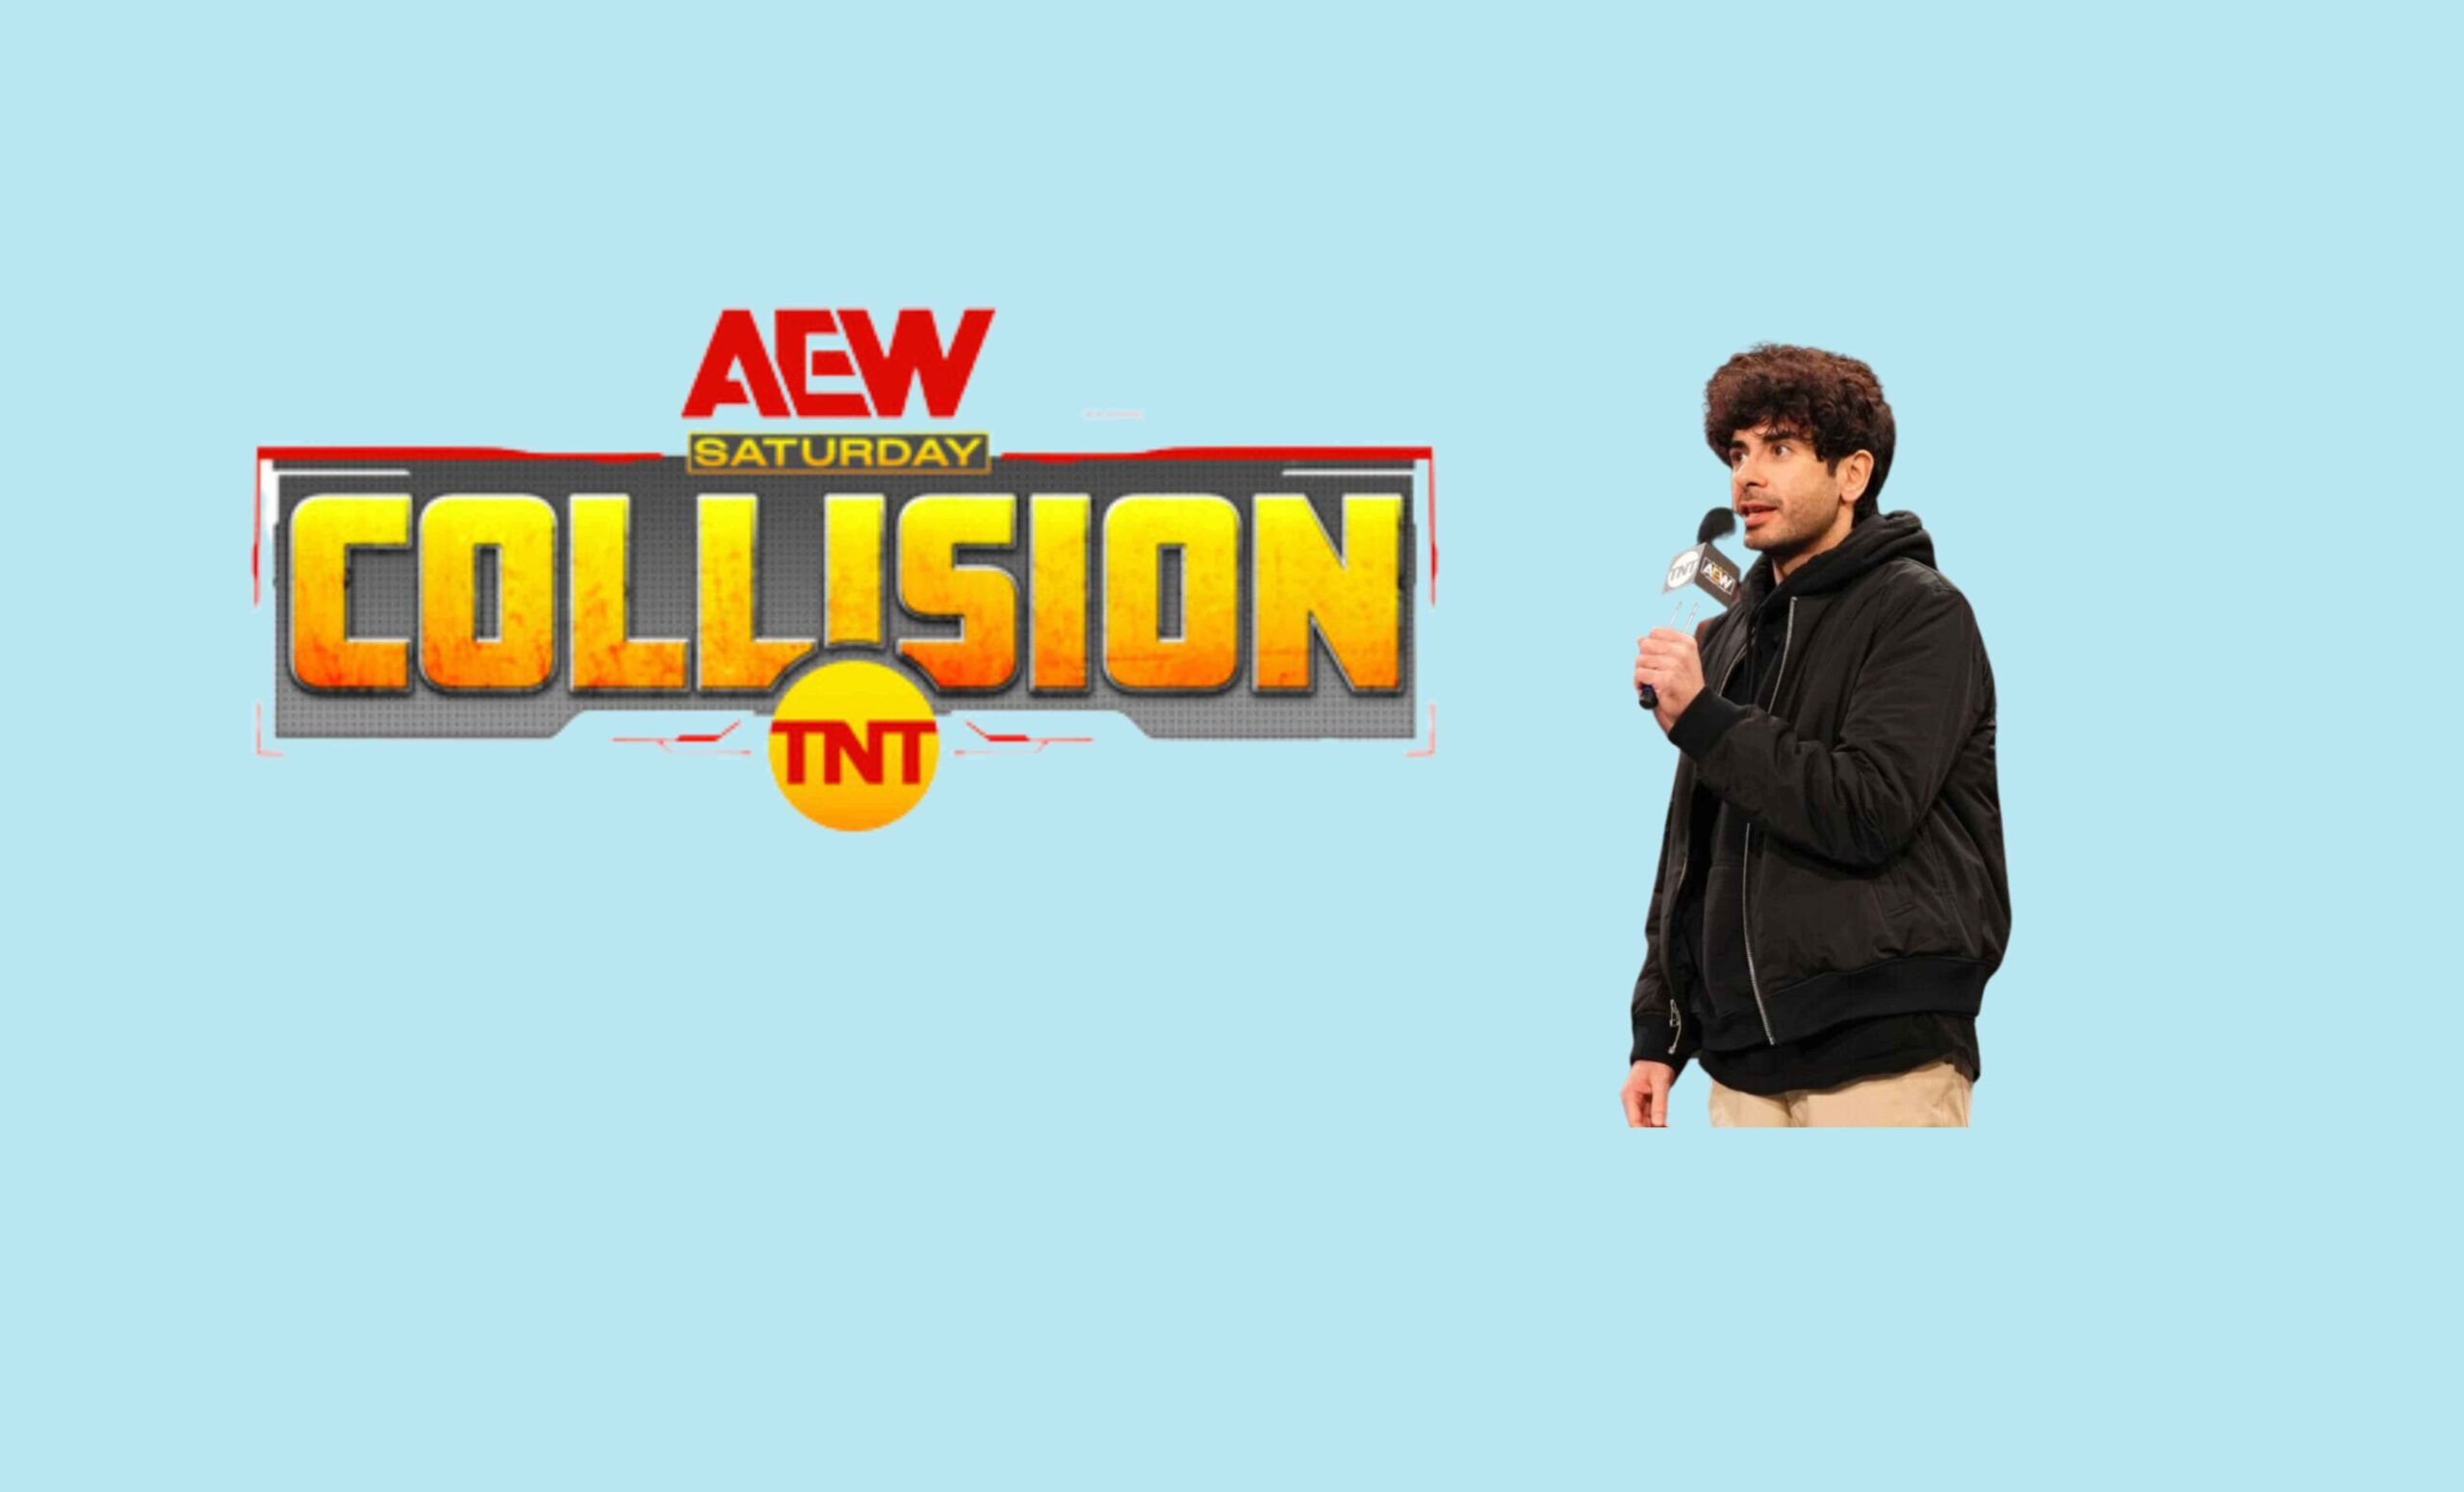 Breaking News: Tony Khan Set to Reveal Main Event of AEW Collision on Dynamite